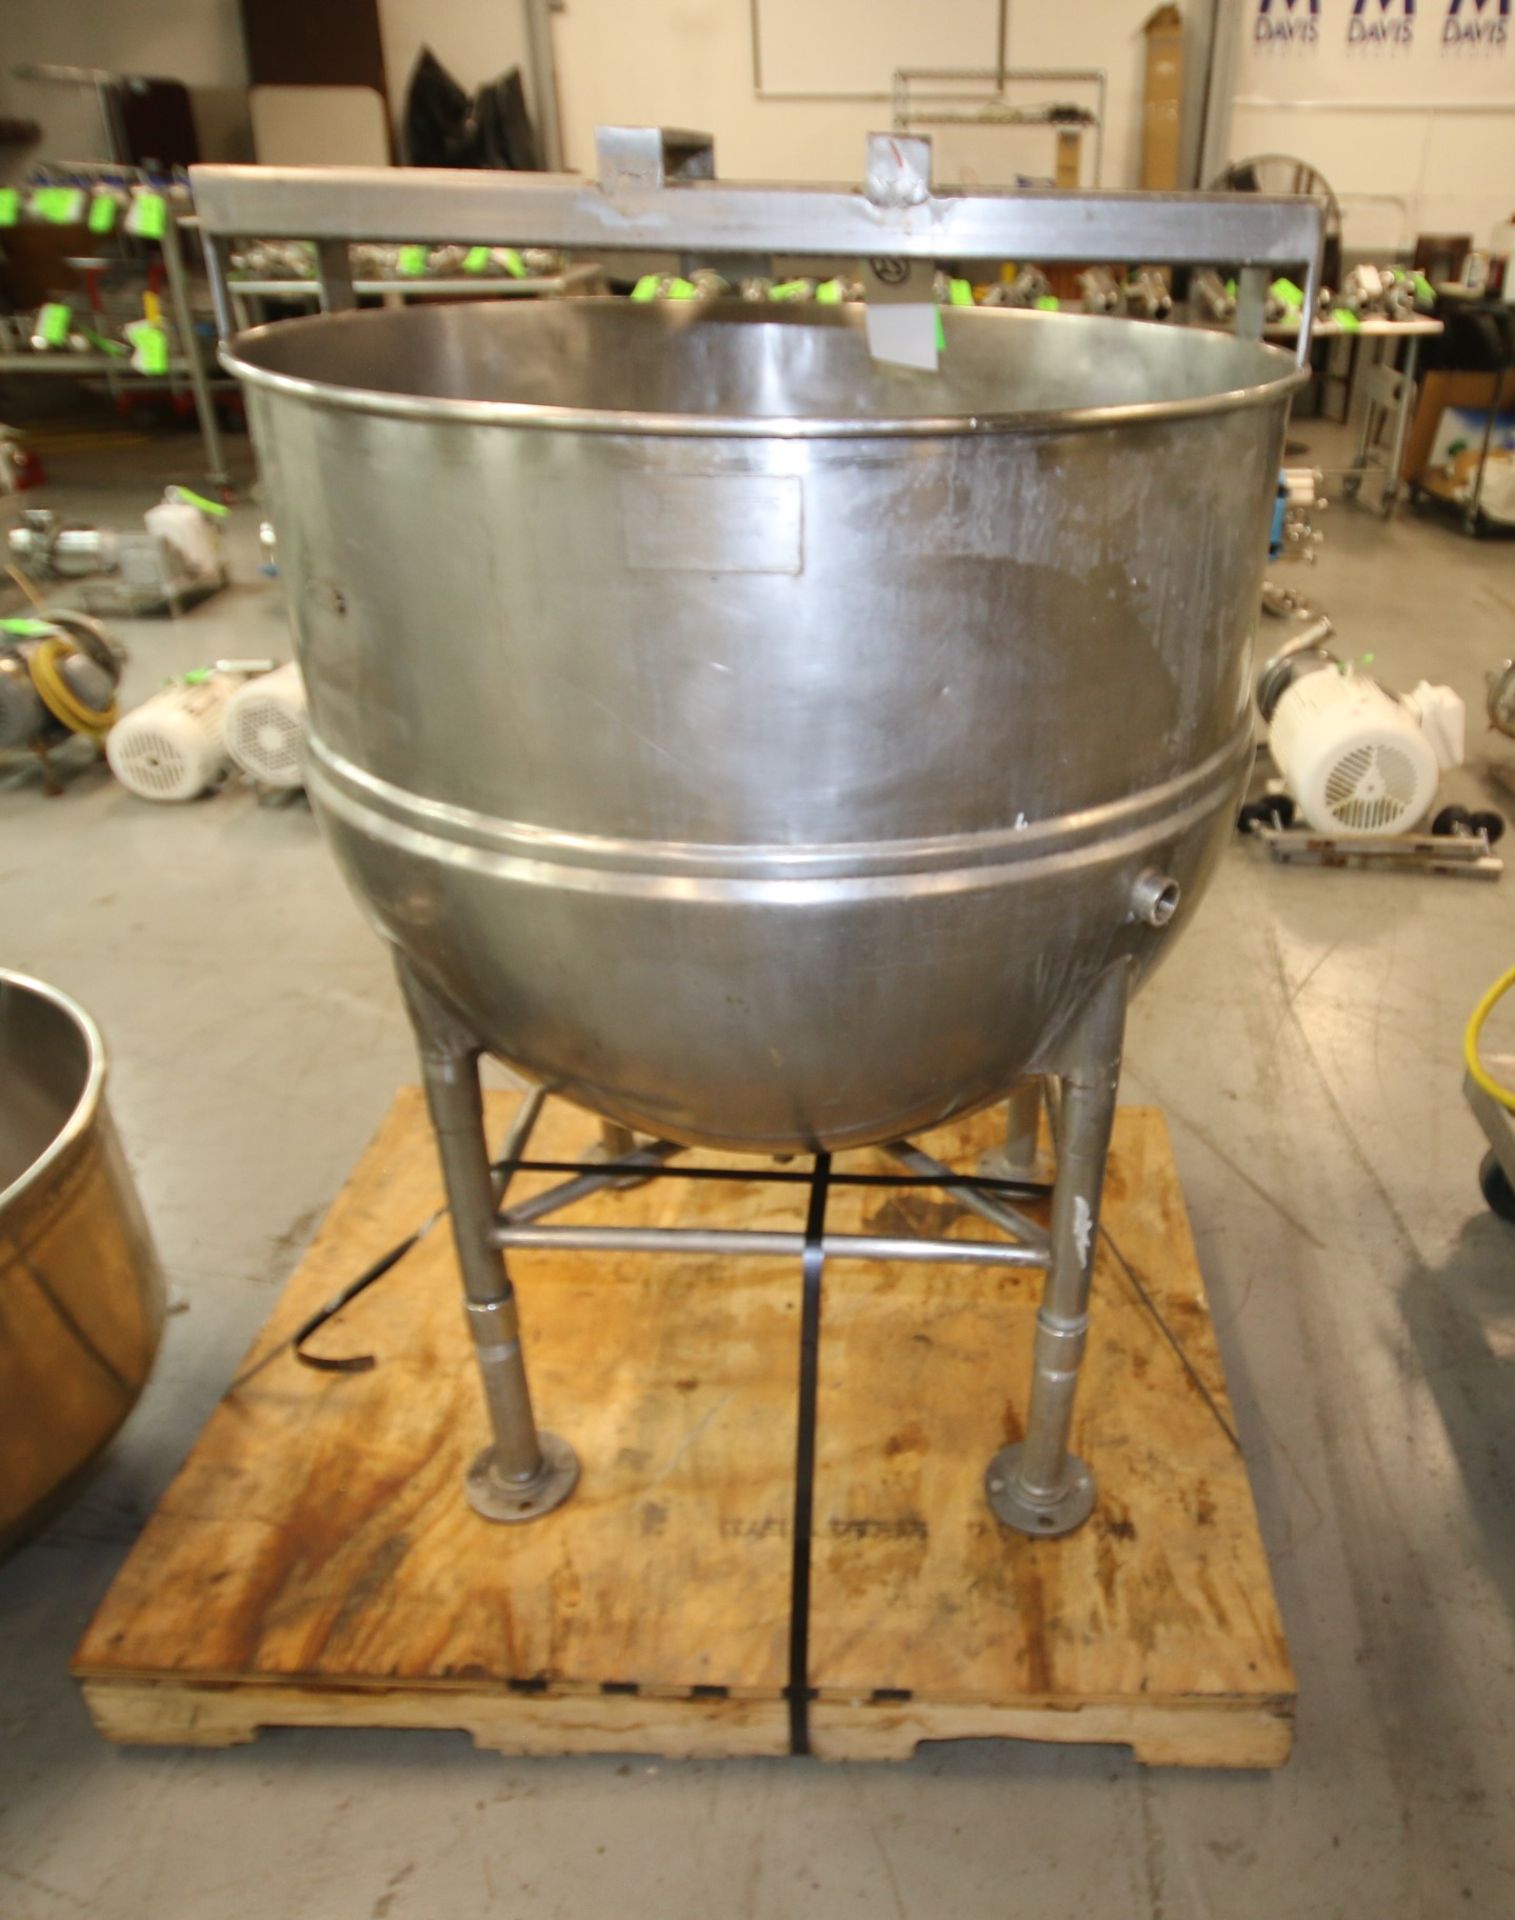 Groen 100 Gallon S/S Jacketed Kettle, Model N 100 SP, B/N 26372, with Mounted Bridge for Agitator, - Image 4 of 6